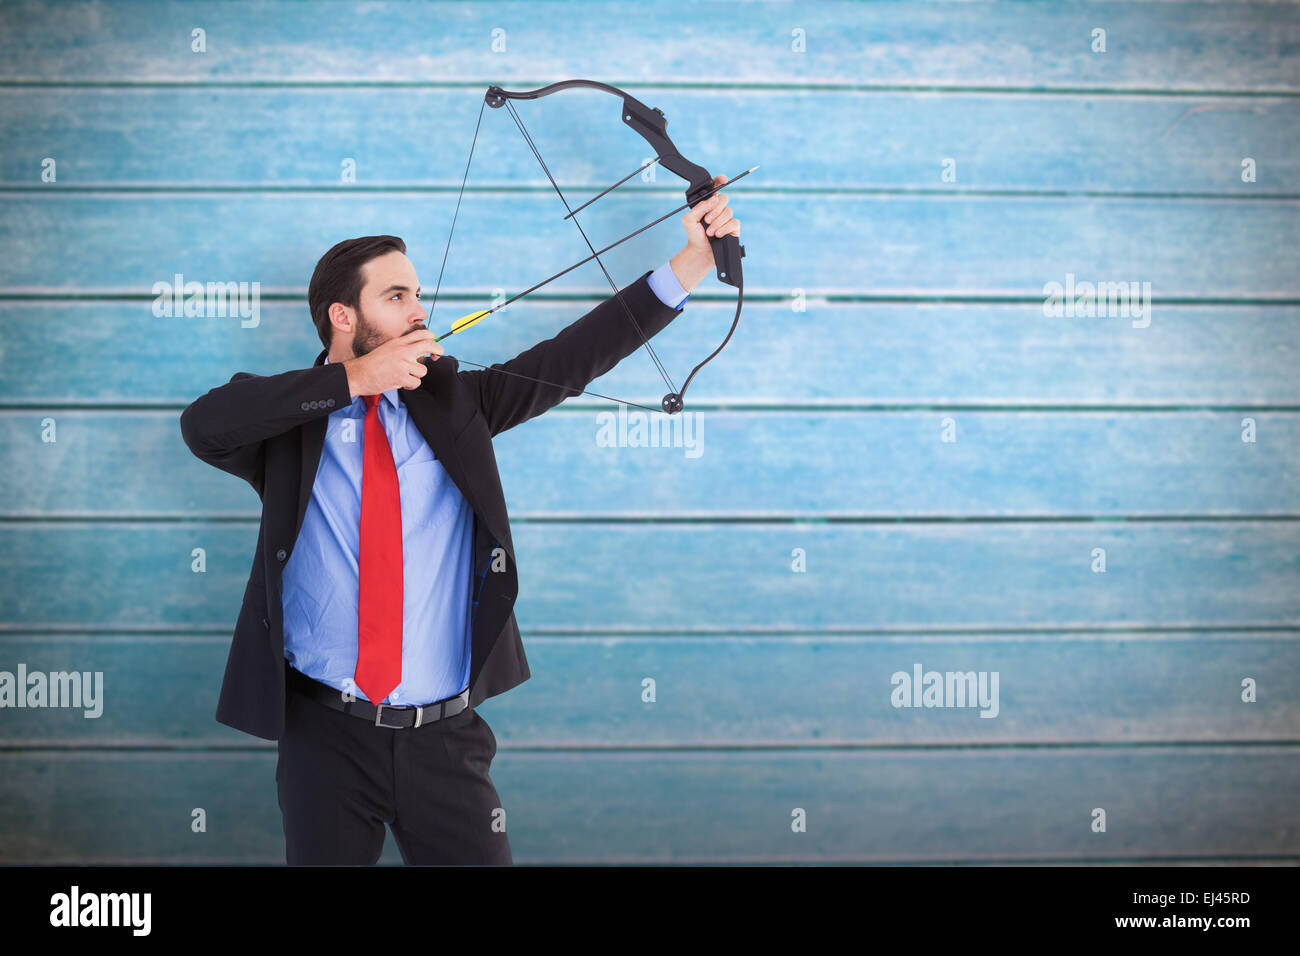 Composite image of focused businessman shooting a bow and arrow Stock Photo